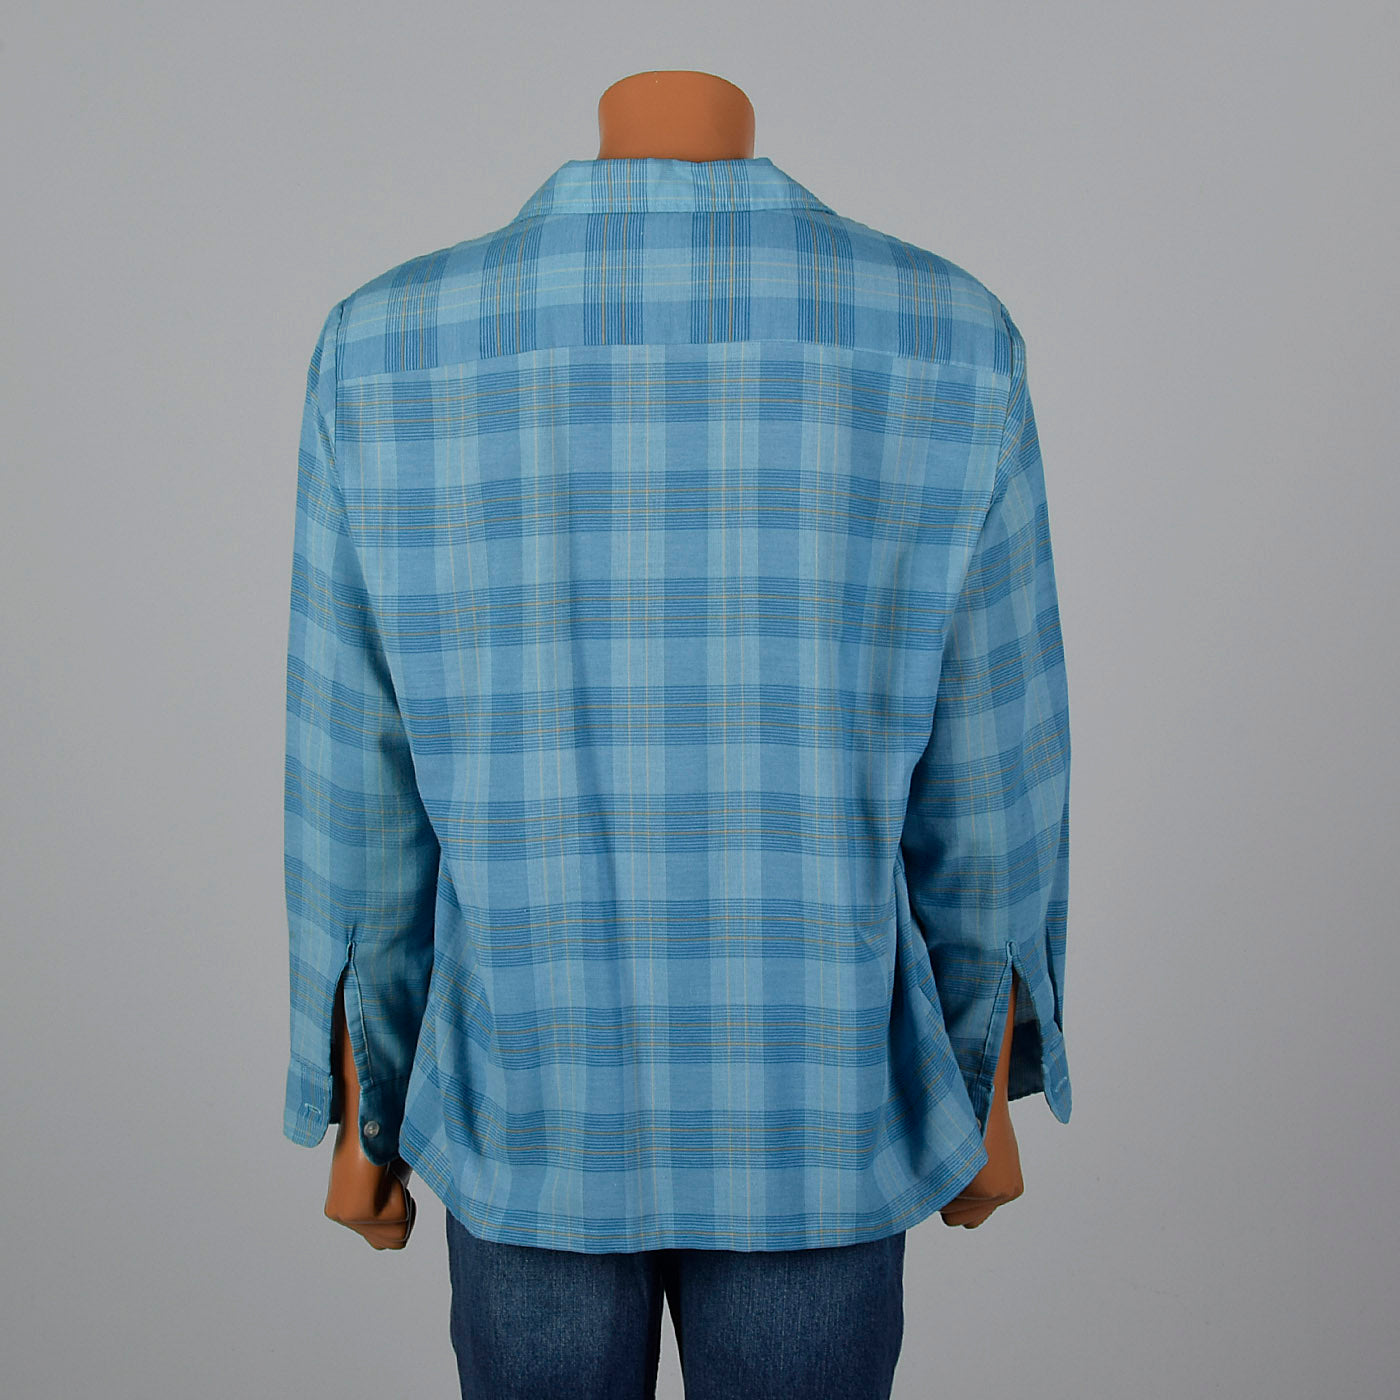 1960s Mens Blue Plaid Shirt with Loop Collar